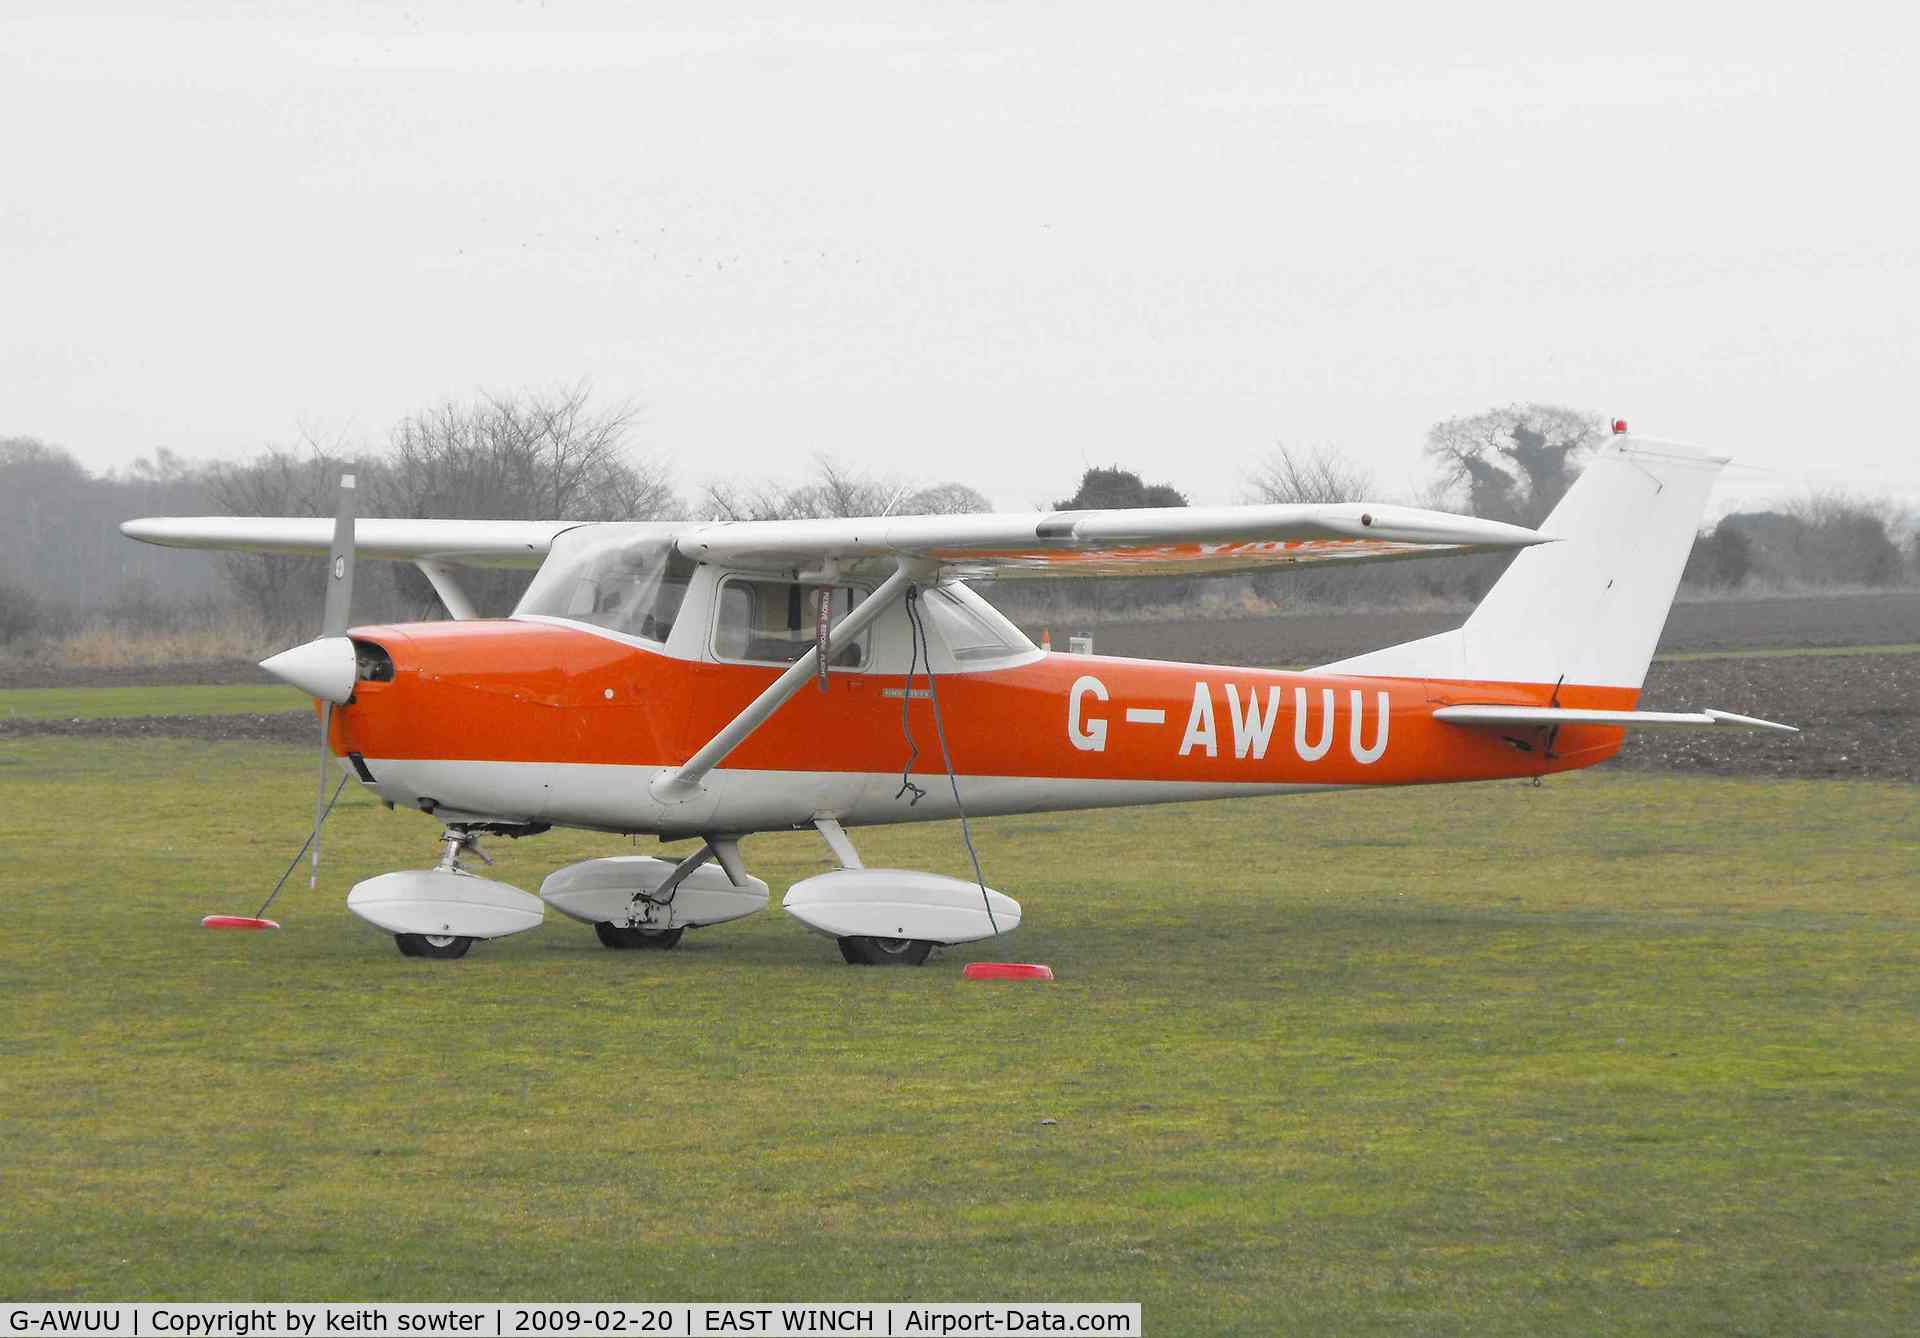 G-AWUU, 1968 Reims F150J C/N 0408, Based aircraft at this private airfield